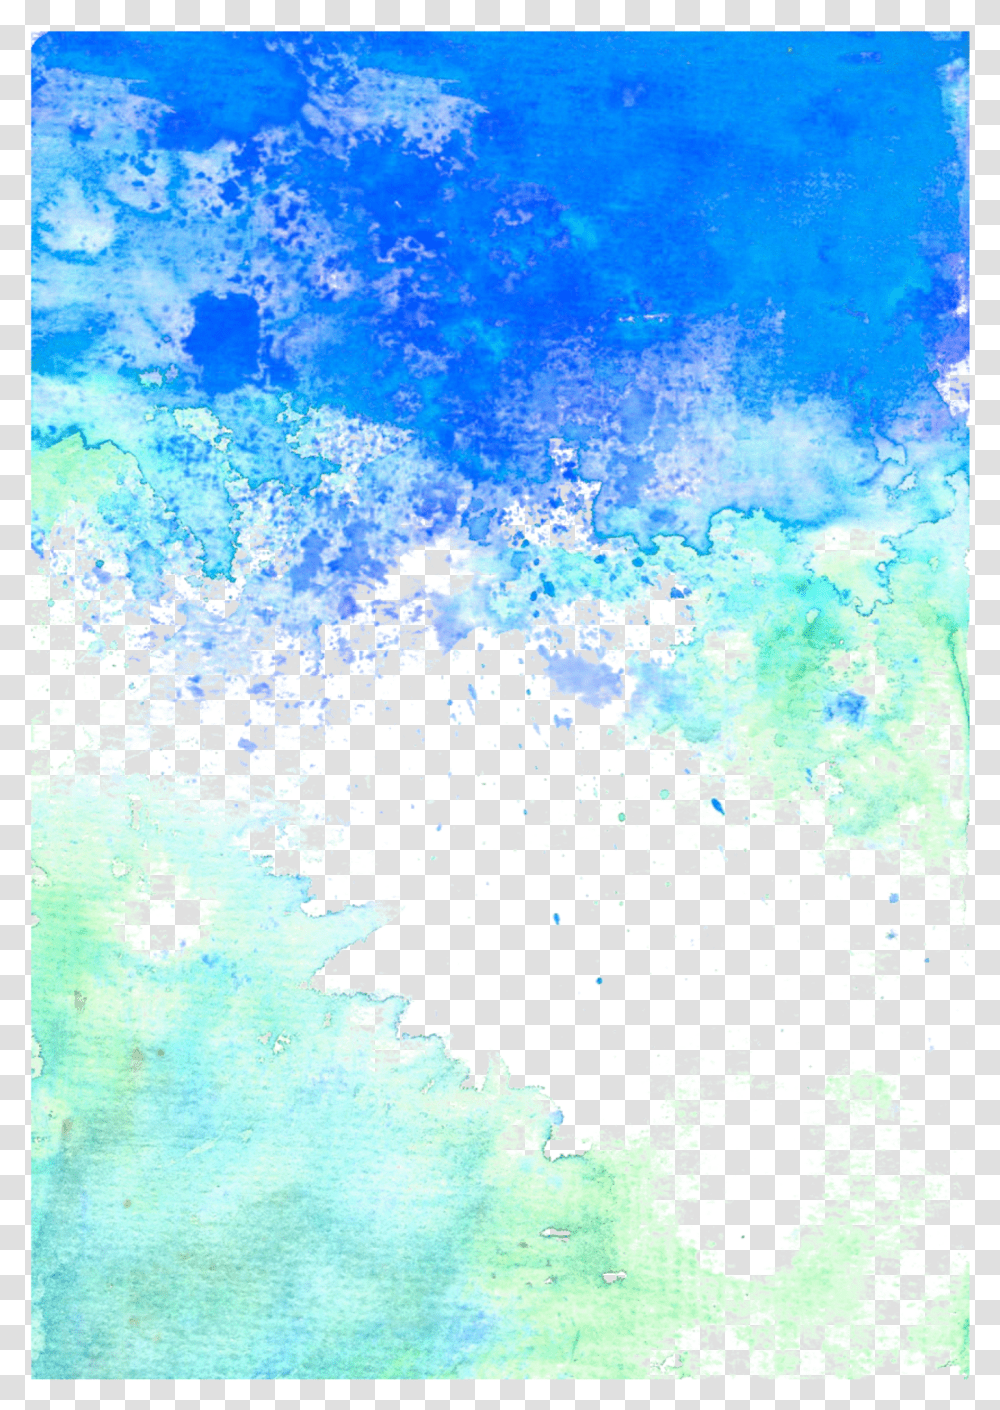 Ftestickers Watercolor Background Overlay Borders Blue Watercolor Borders Transparent Png